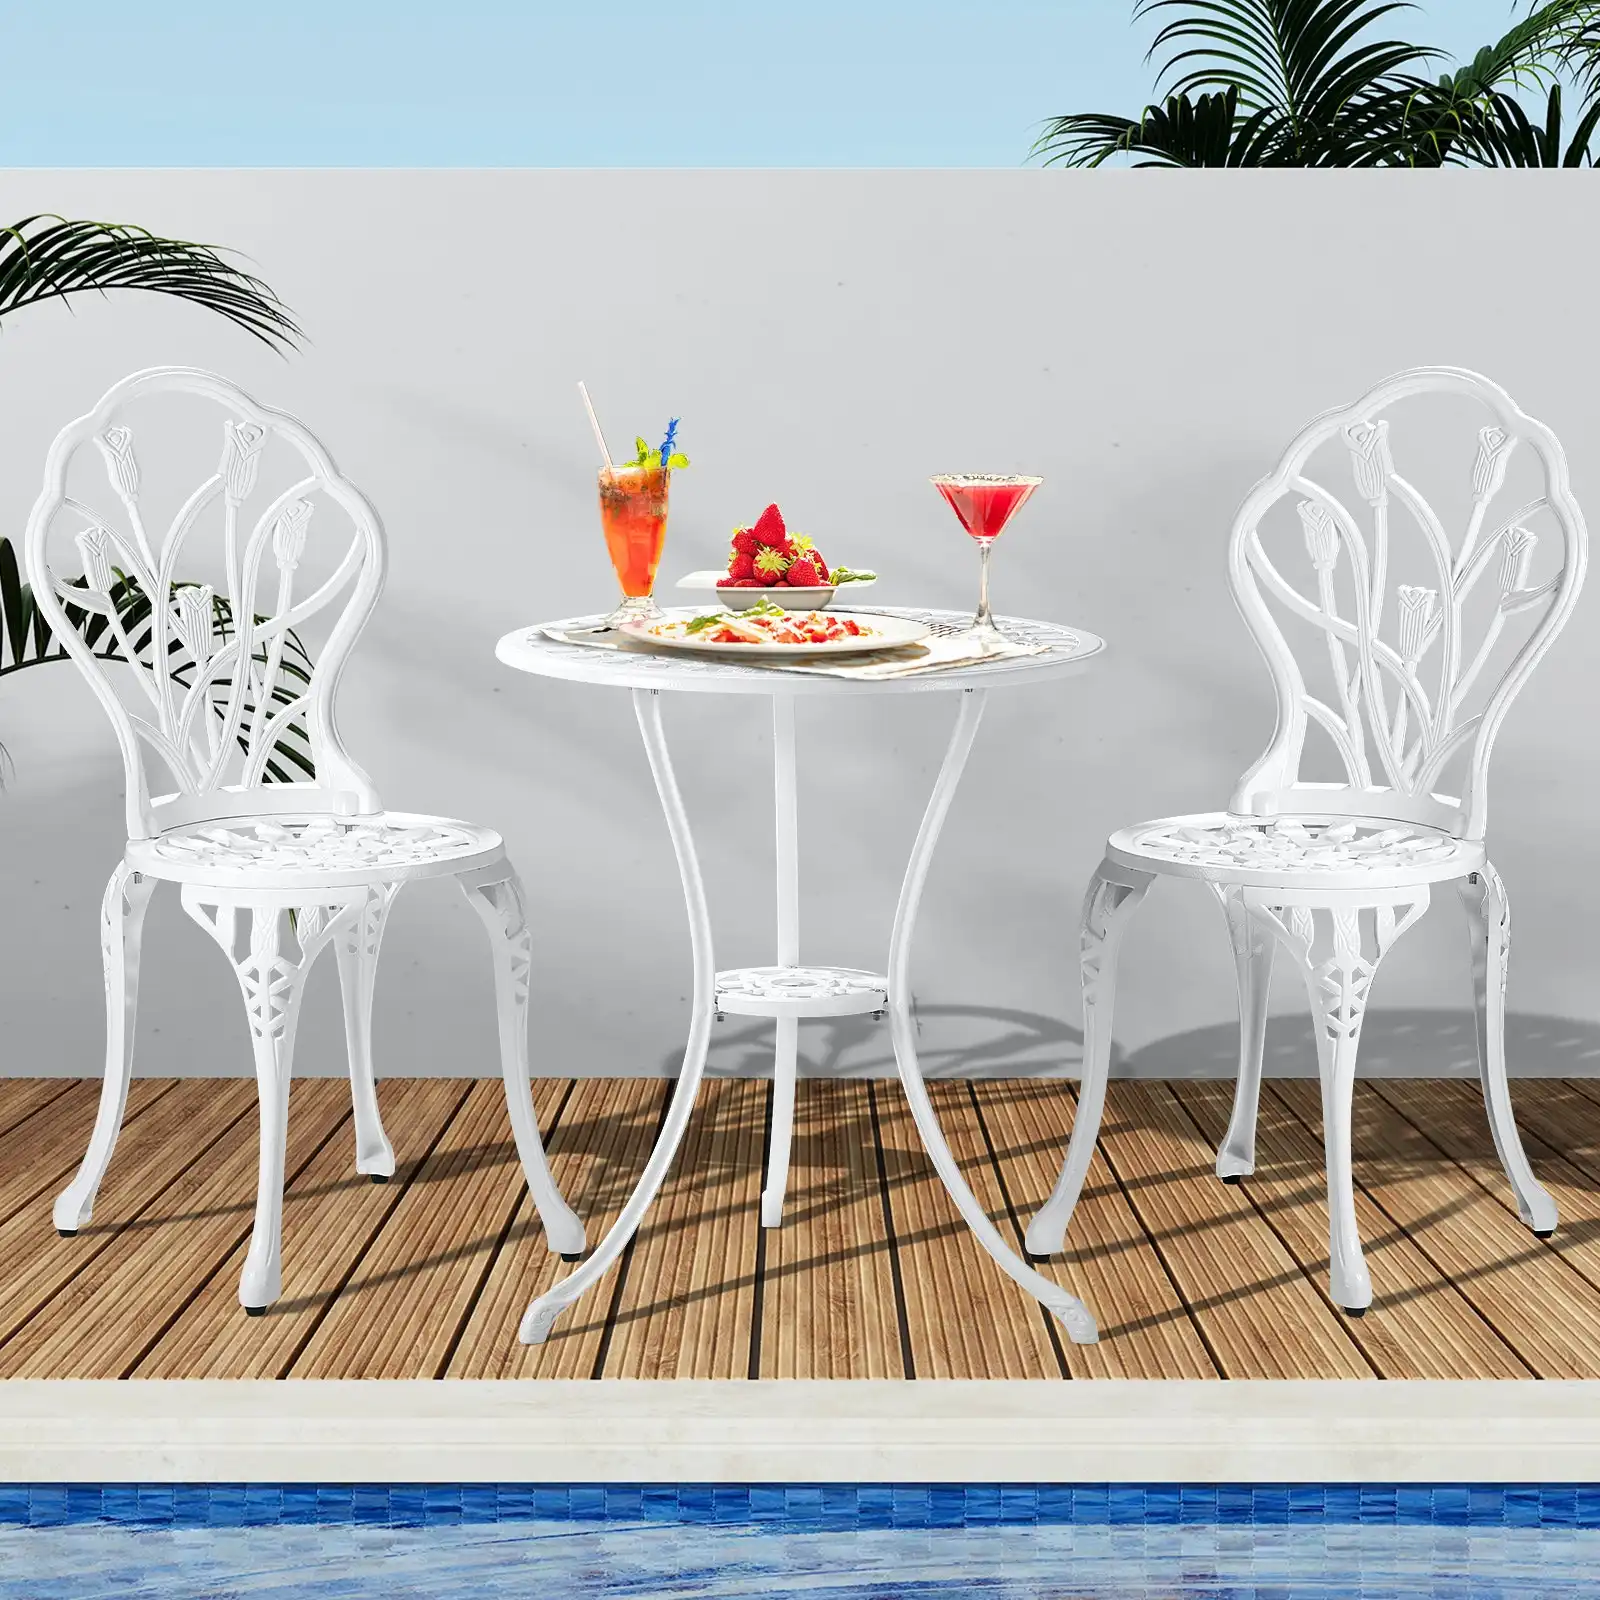 Livsip 3 Piece Outdoor Furniture Setting Chairs Table Bistro Patio Dining Set